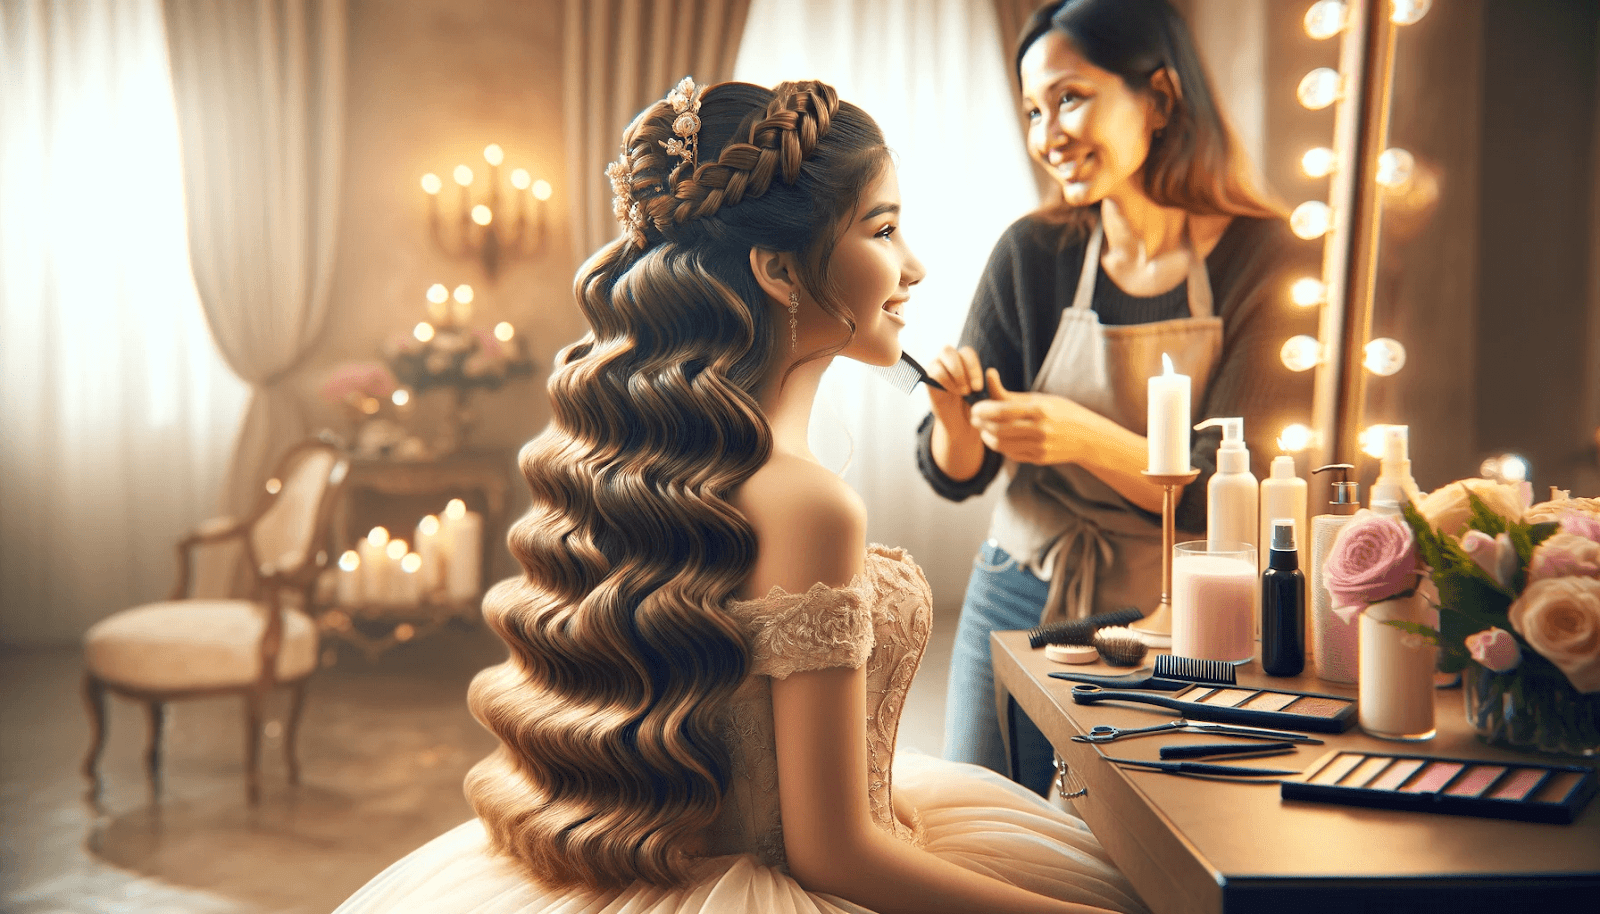 Quinceanera hairstyle: A young woman sitting in front of a mirror getting her hair done